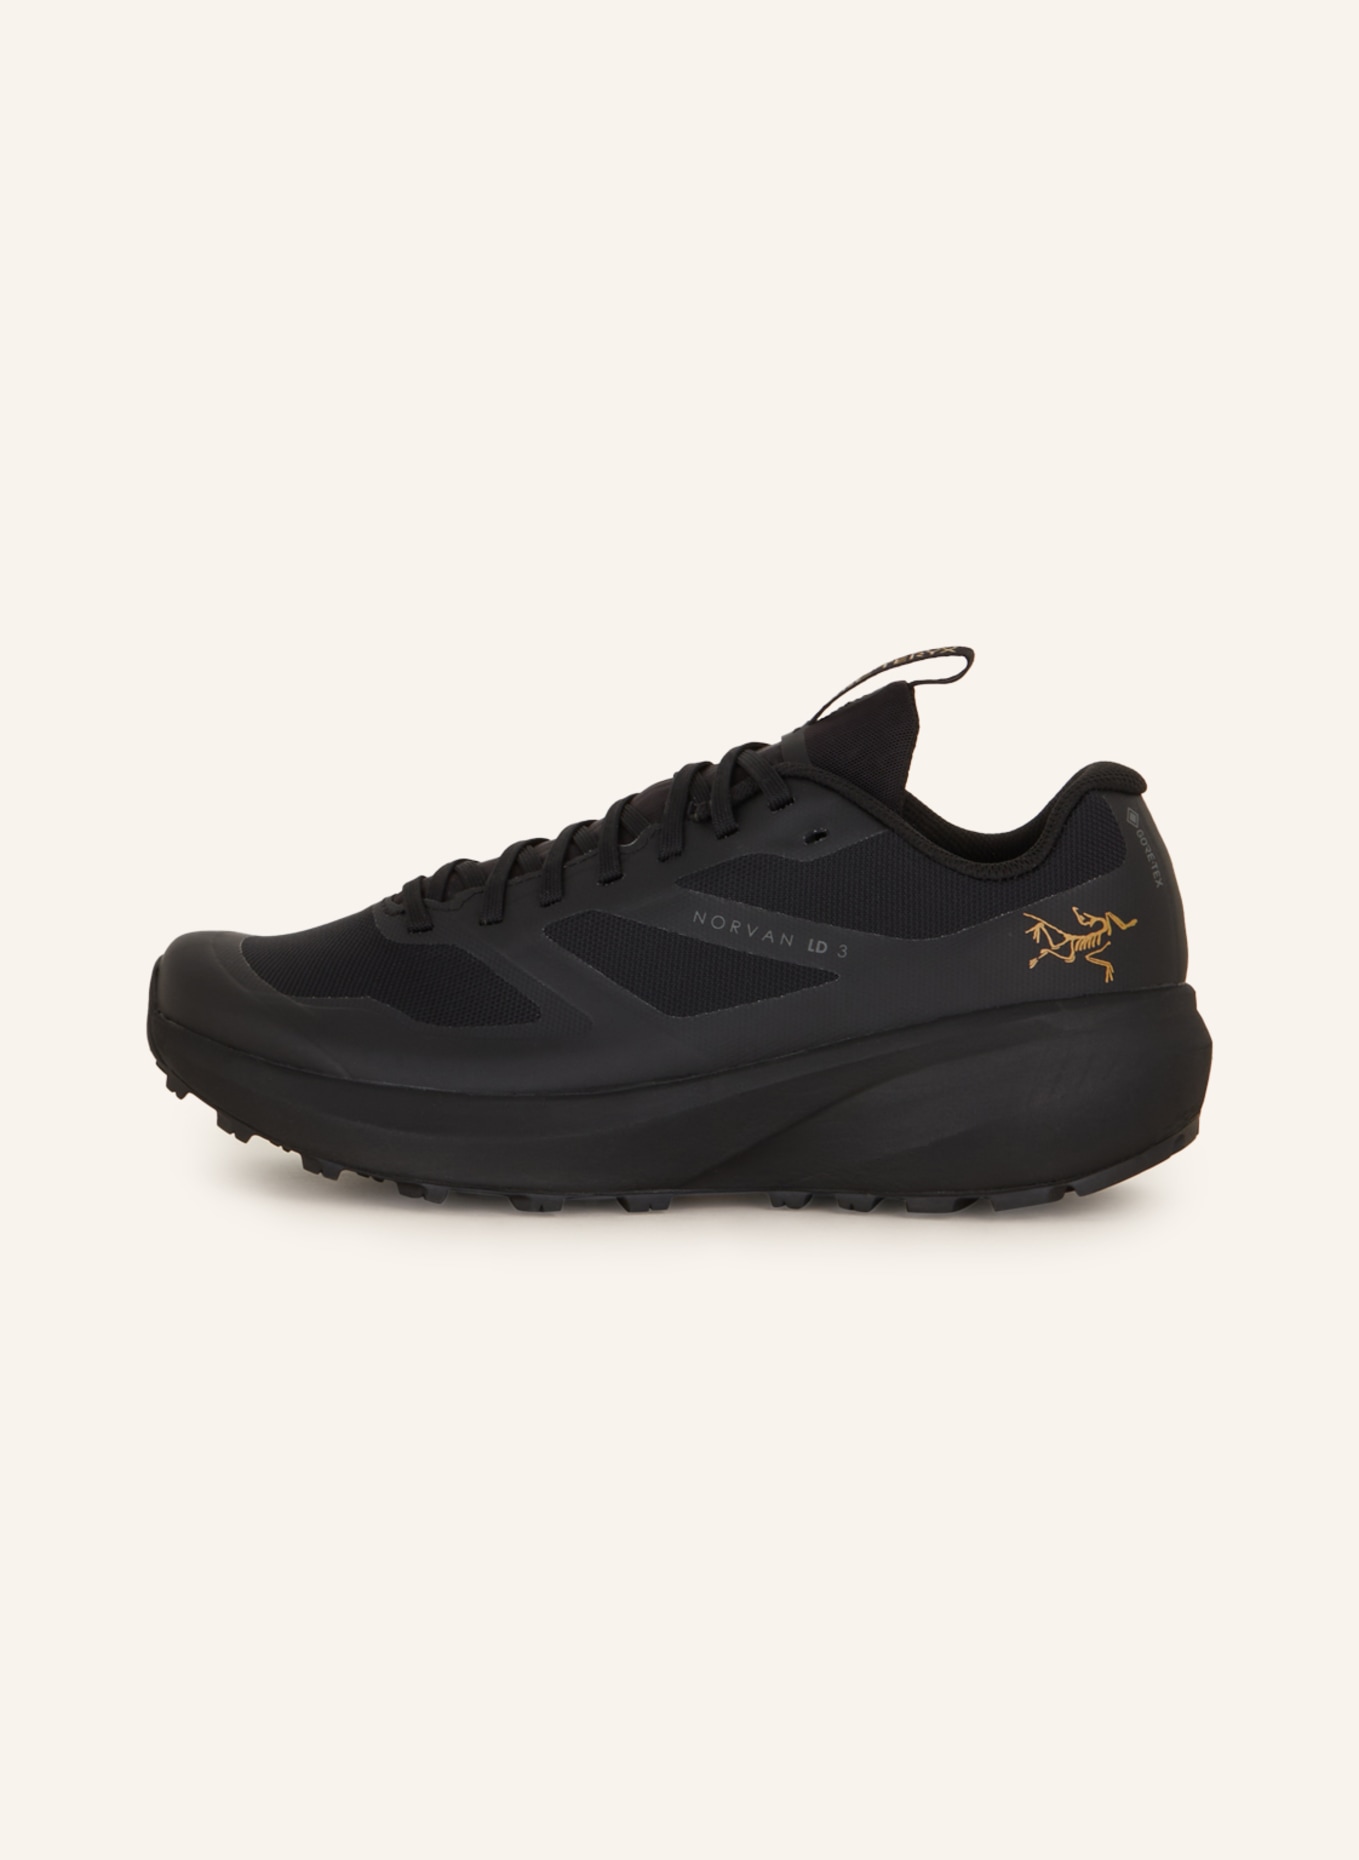 ARC'TERYX Trail running shoes NORVAN LD 3 GTX, Color: BLACK (Image 4)